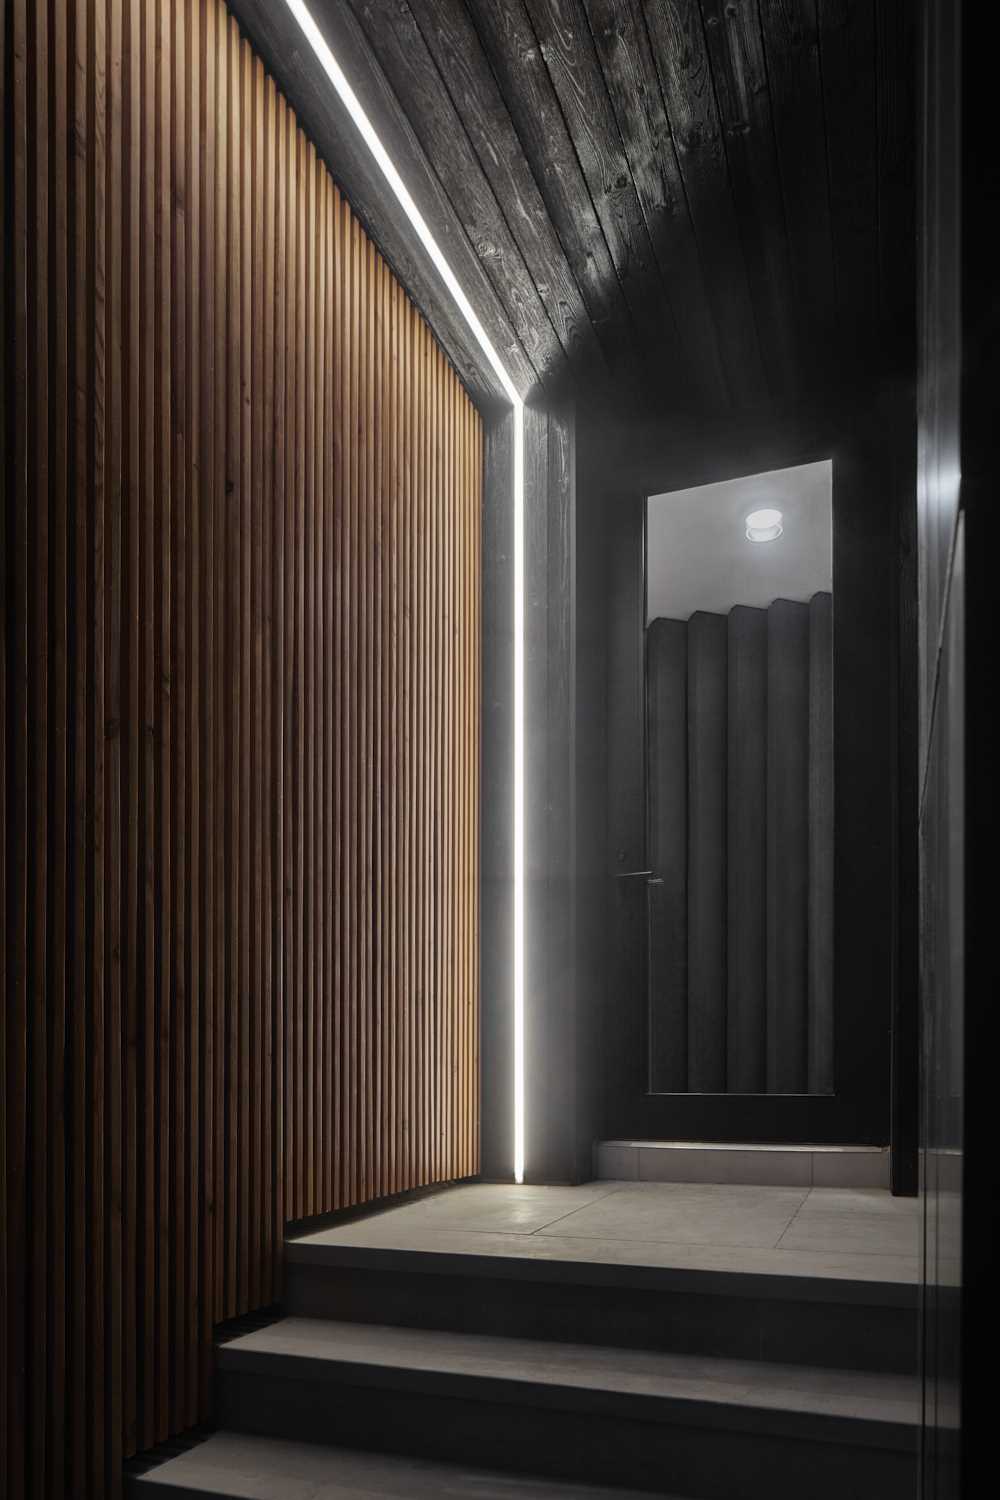 A partial wood slat facade softens the exterior of this modern house, while steps lead to the entryway and front door, which also includes LED lighting.